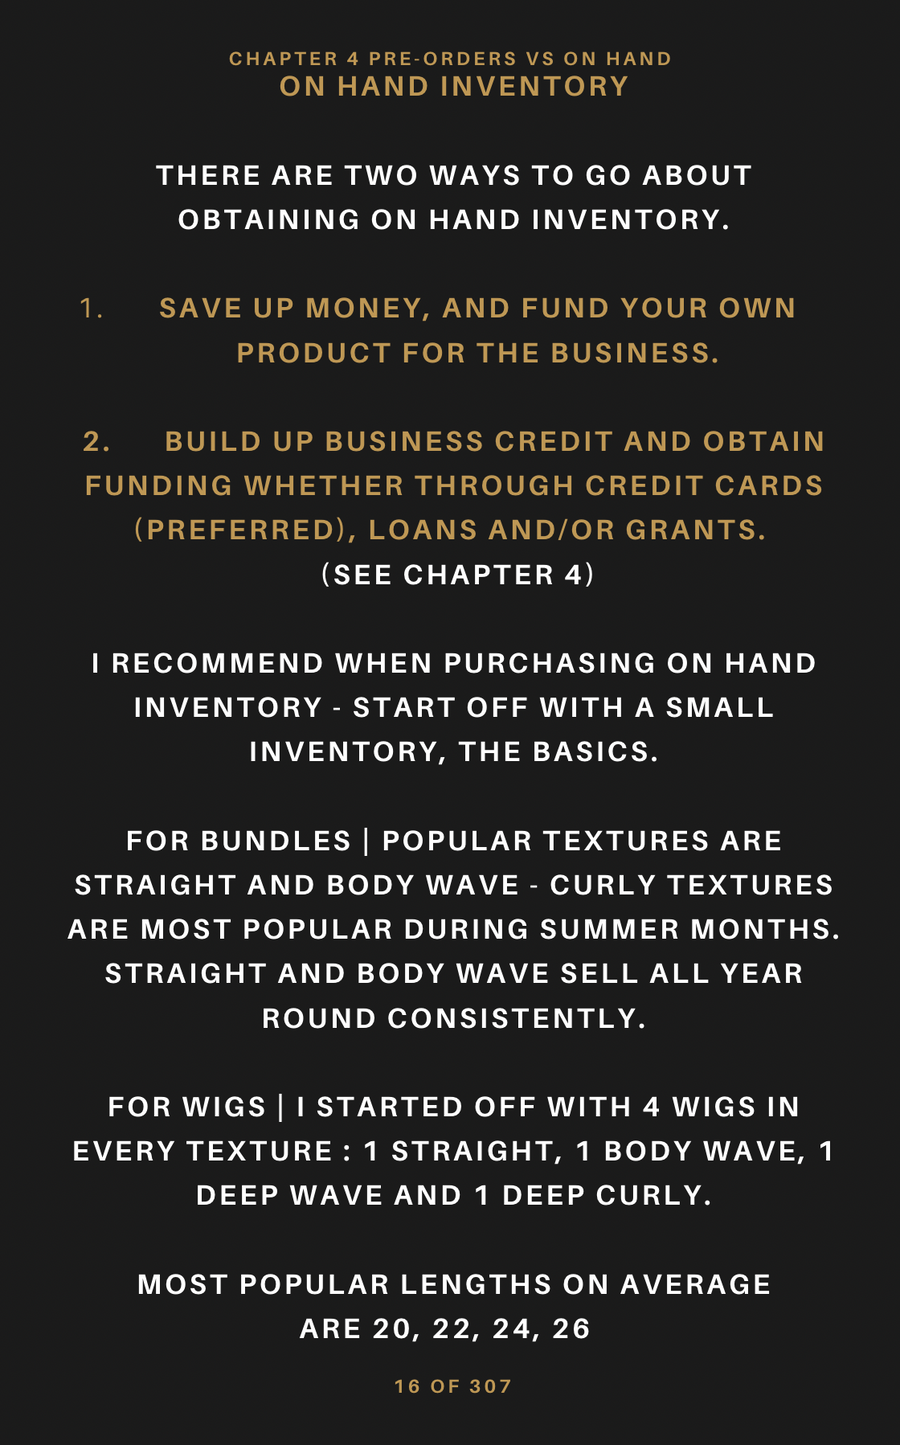 HER VENDOR CONNECT | START UP A HAIR BUSINESS 73 PAGE COURSE